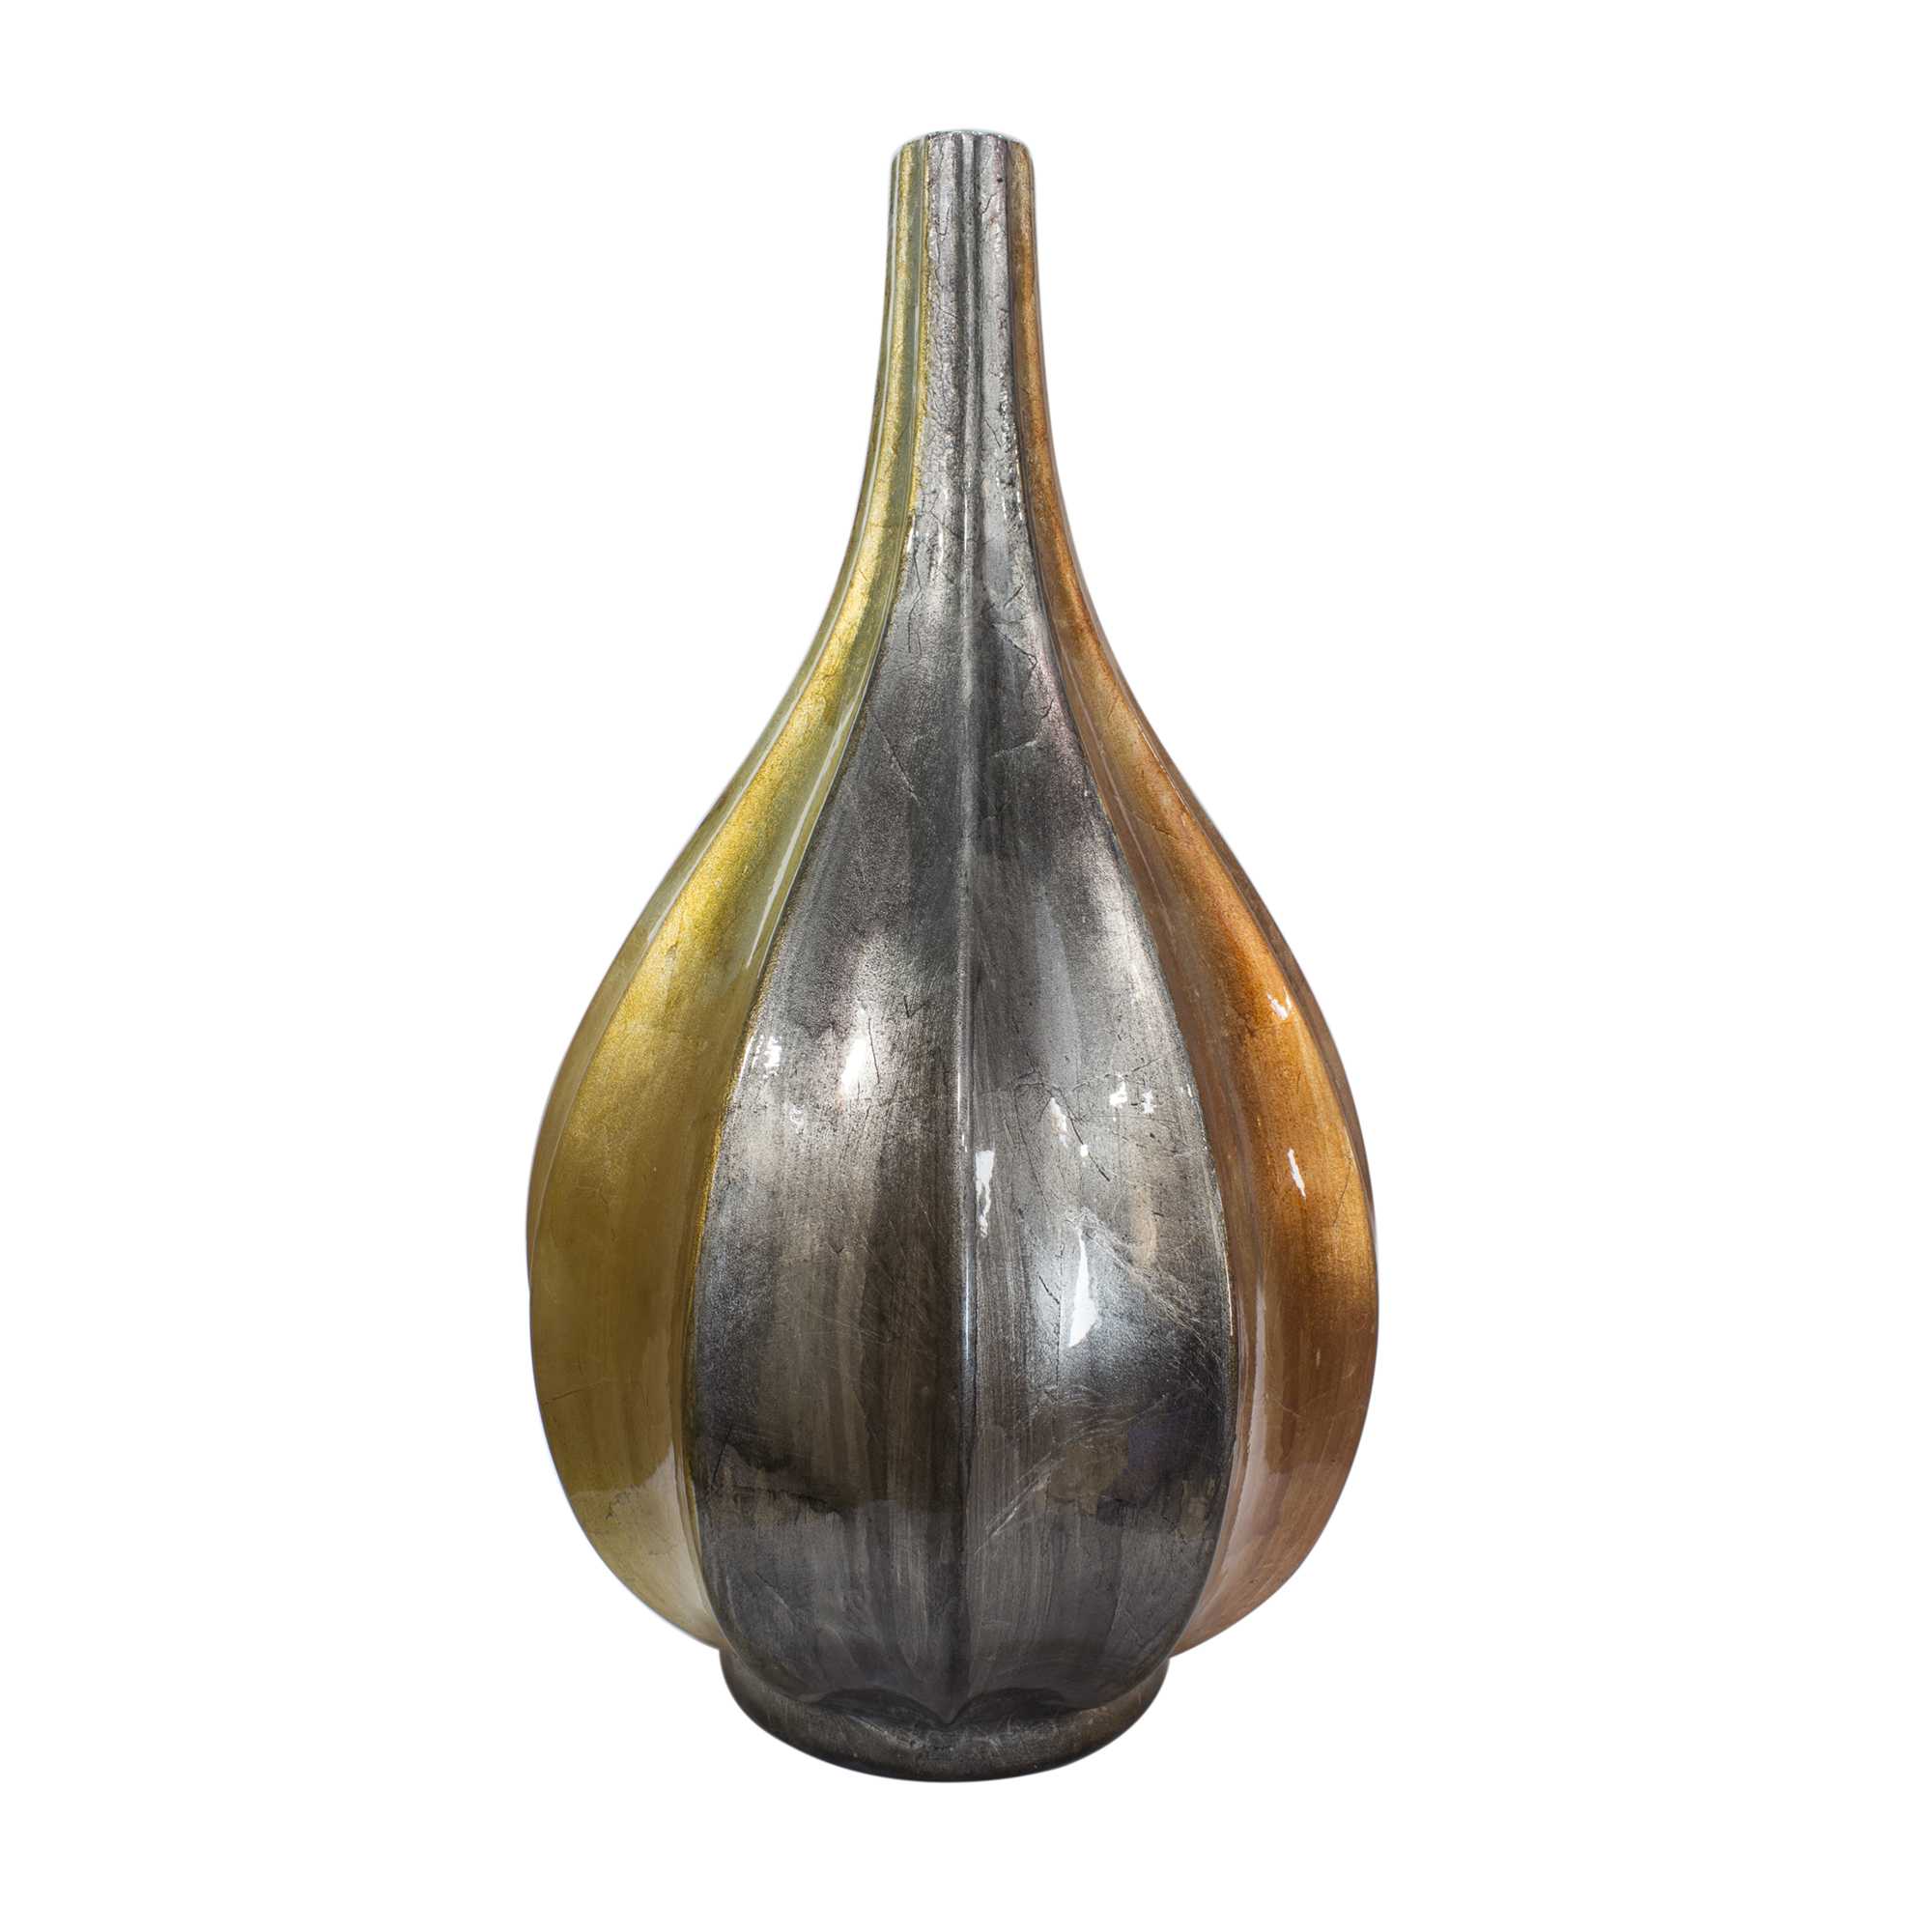 Kya Copper Gold Pewter Foil and Lacquer Ceramic Teardrop Vase